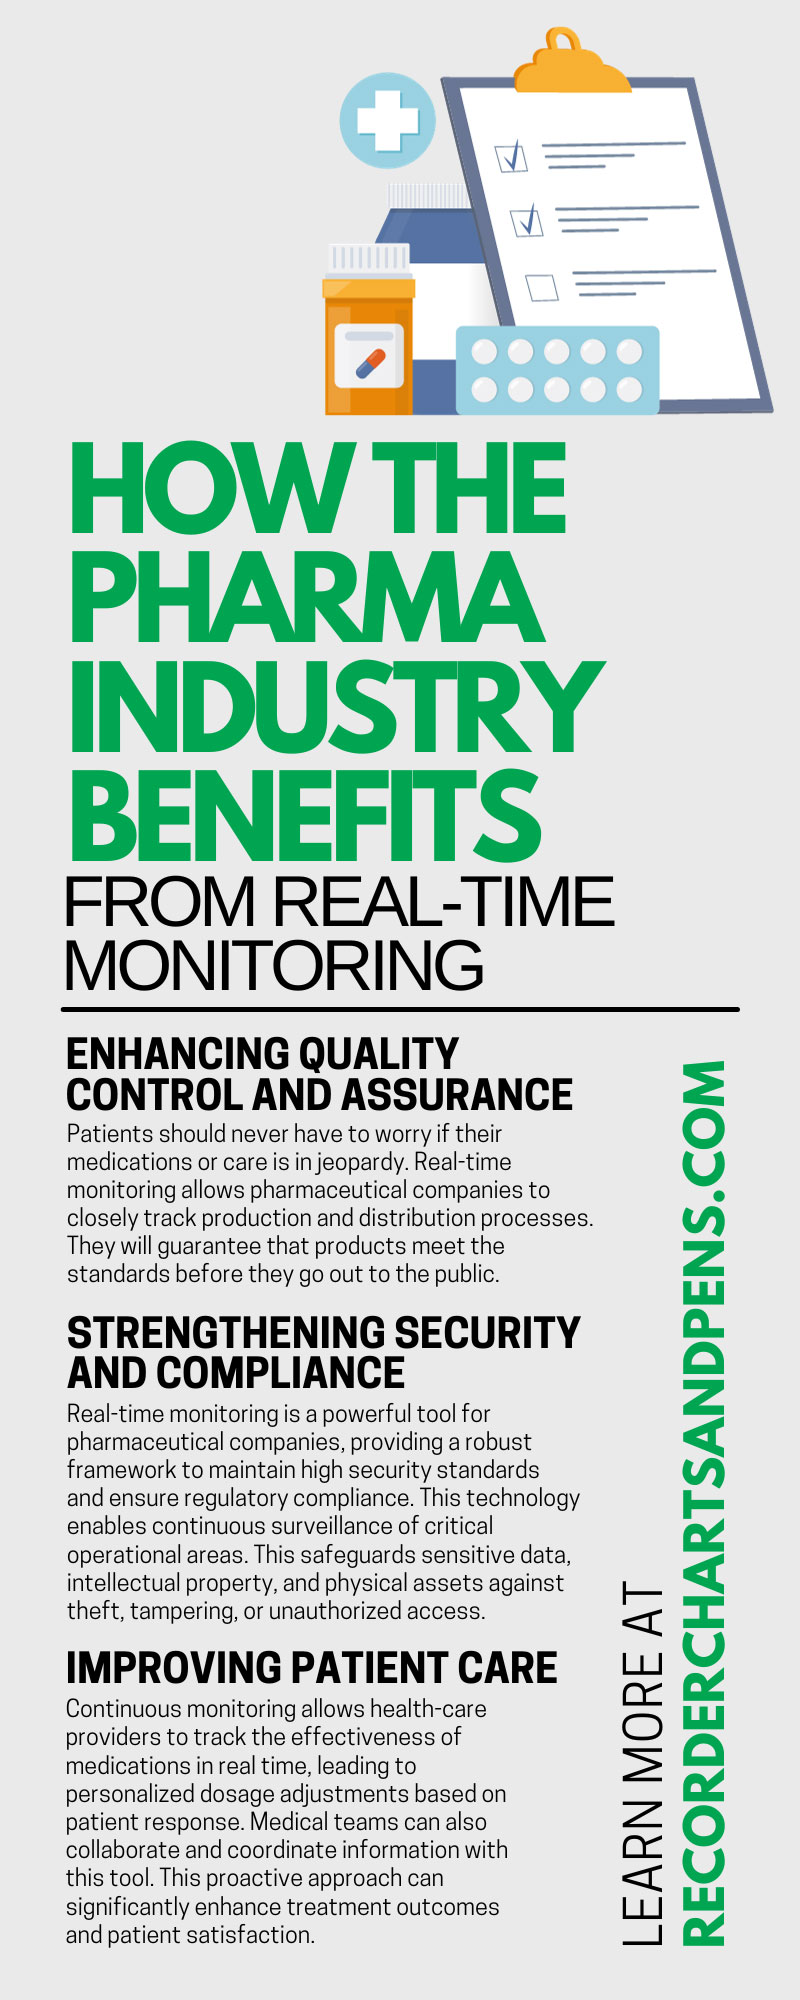 How the Pharma Industry Benefits From Real-Time Monitoring